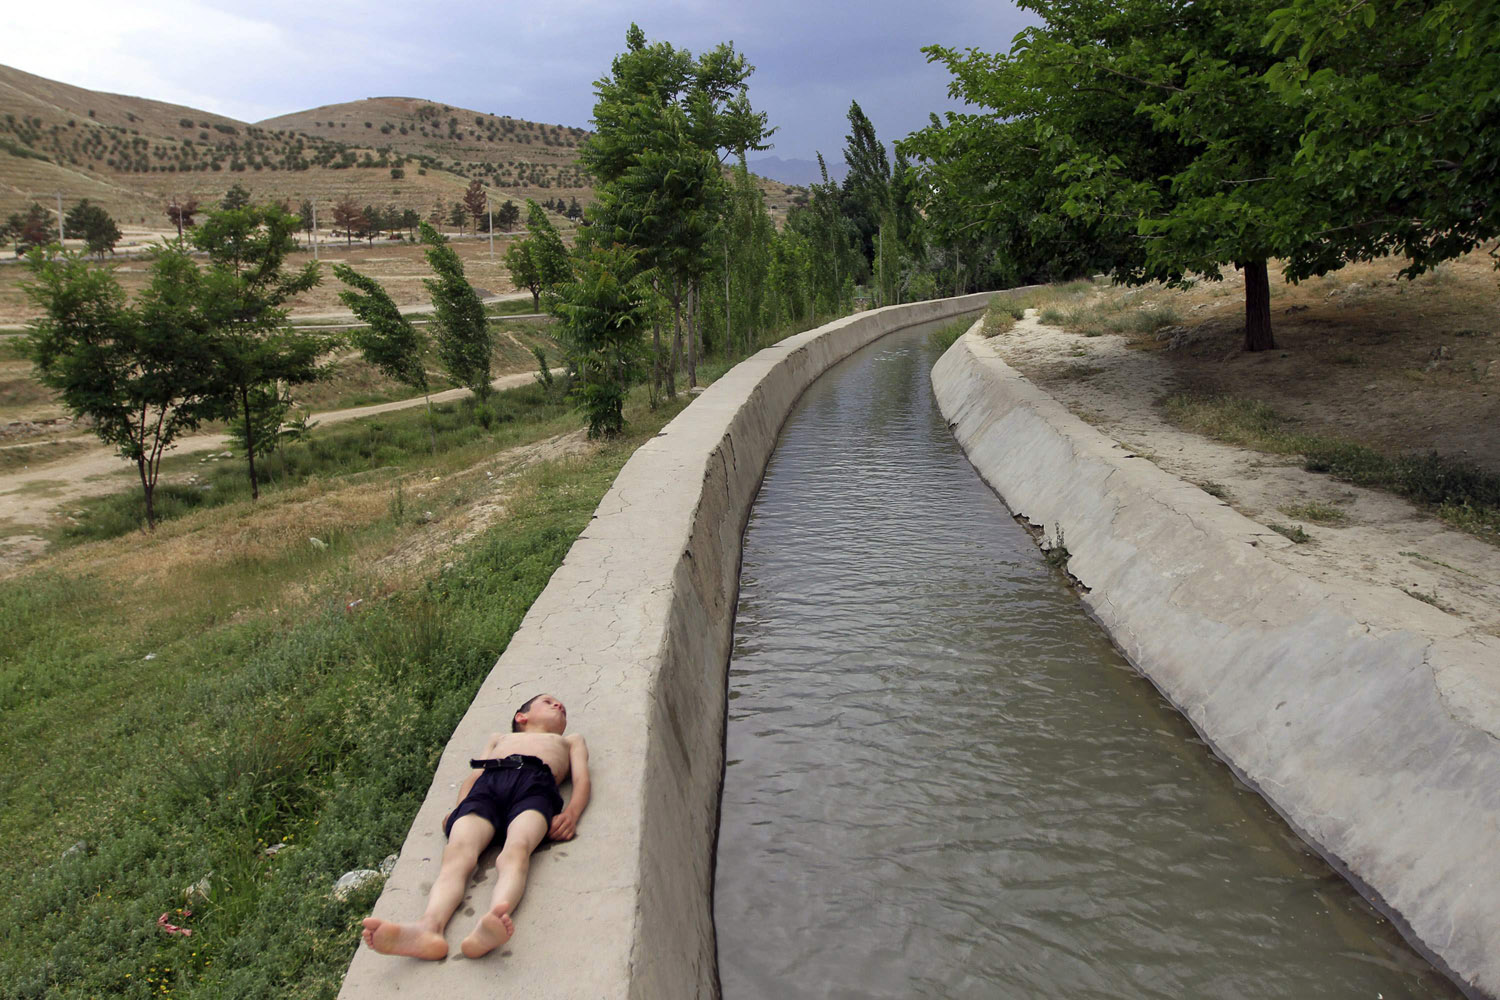 June 12, 2012. A boy lies on the side of a stream in Kabul.